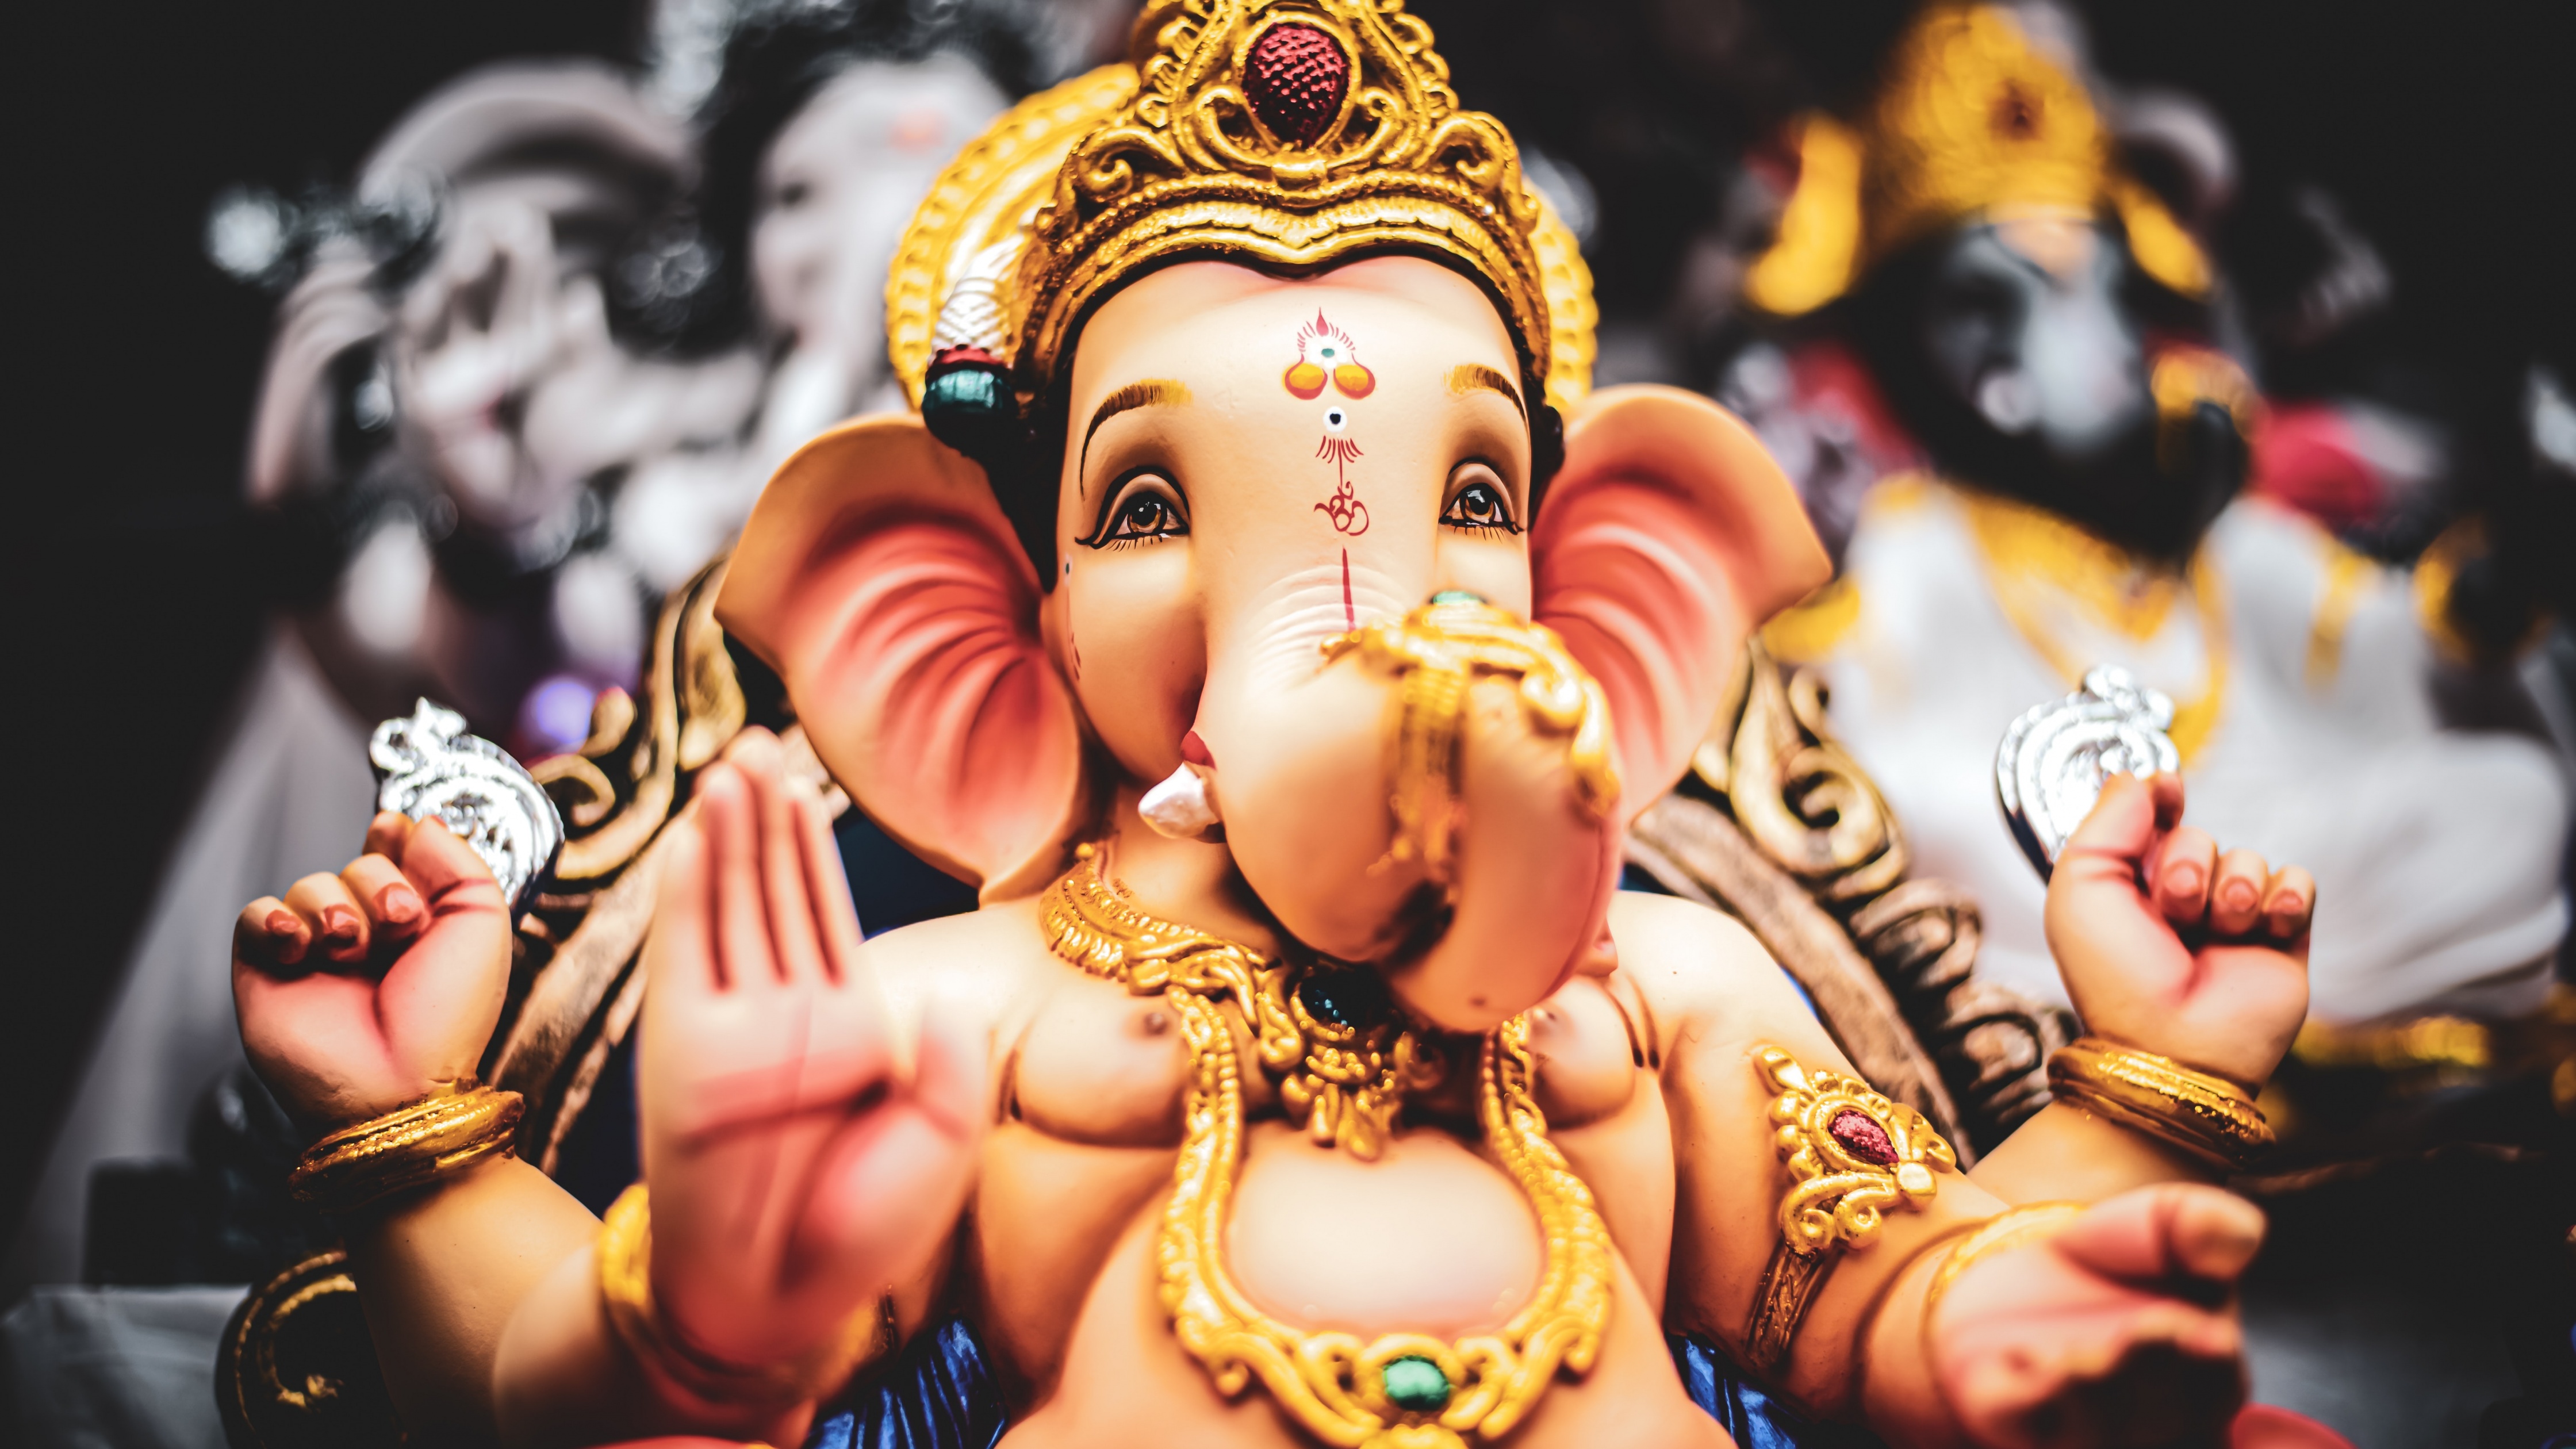 100+] Ganesh Black And White Wallpapers | Wallpapers.com